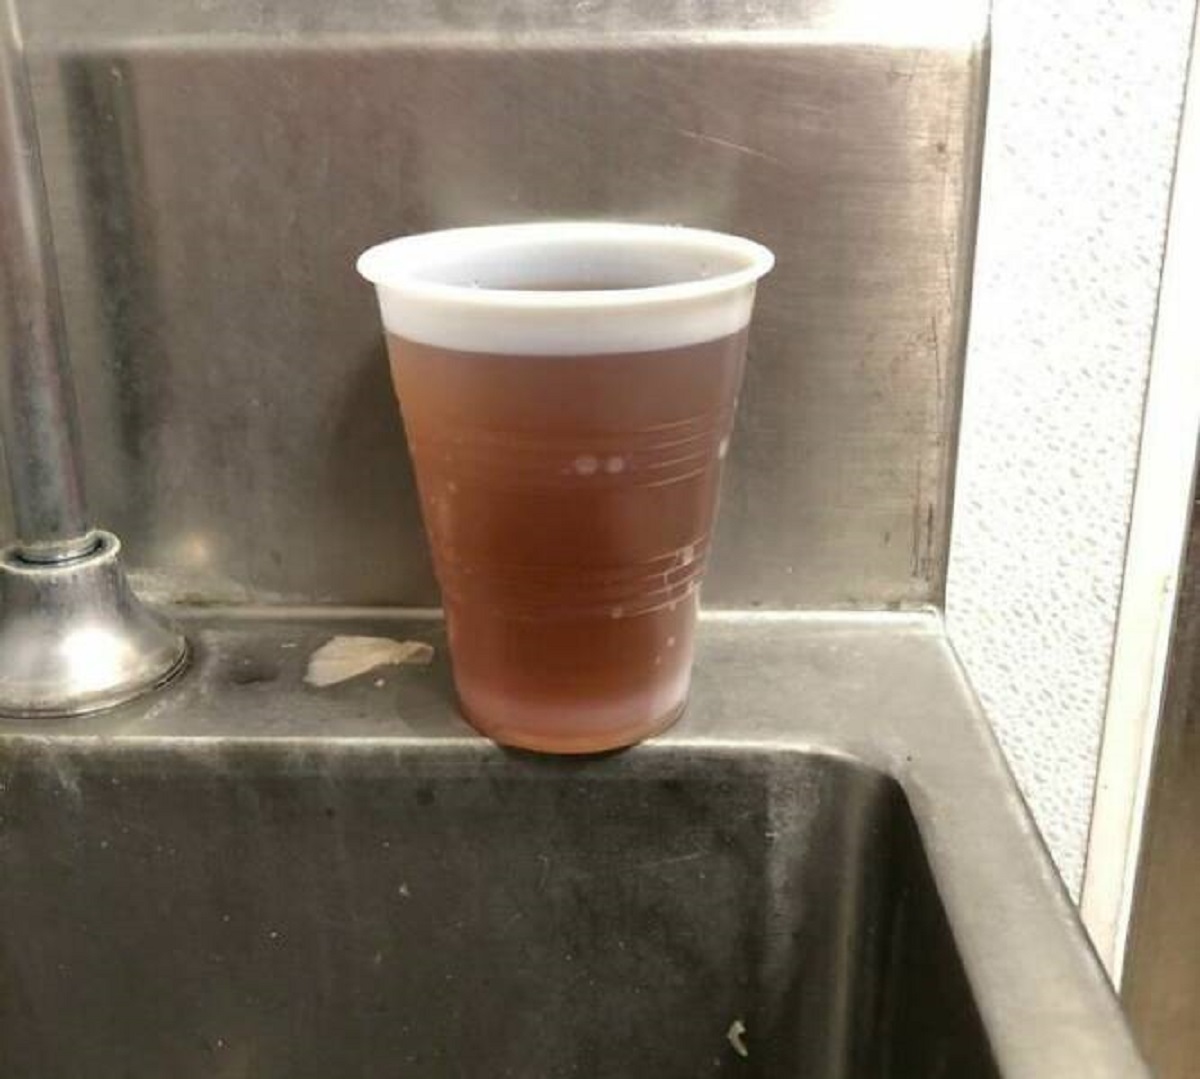 "The Water Coming Out Of The Kitchen Faucet At Work. I Work At A Restaurant"